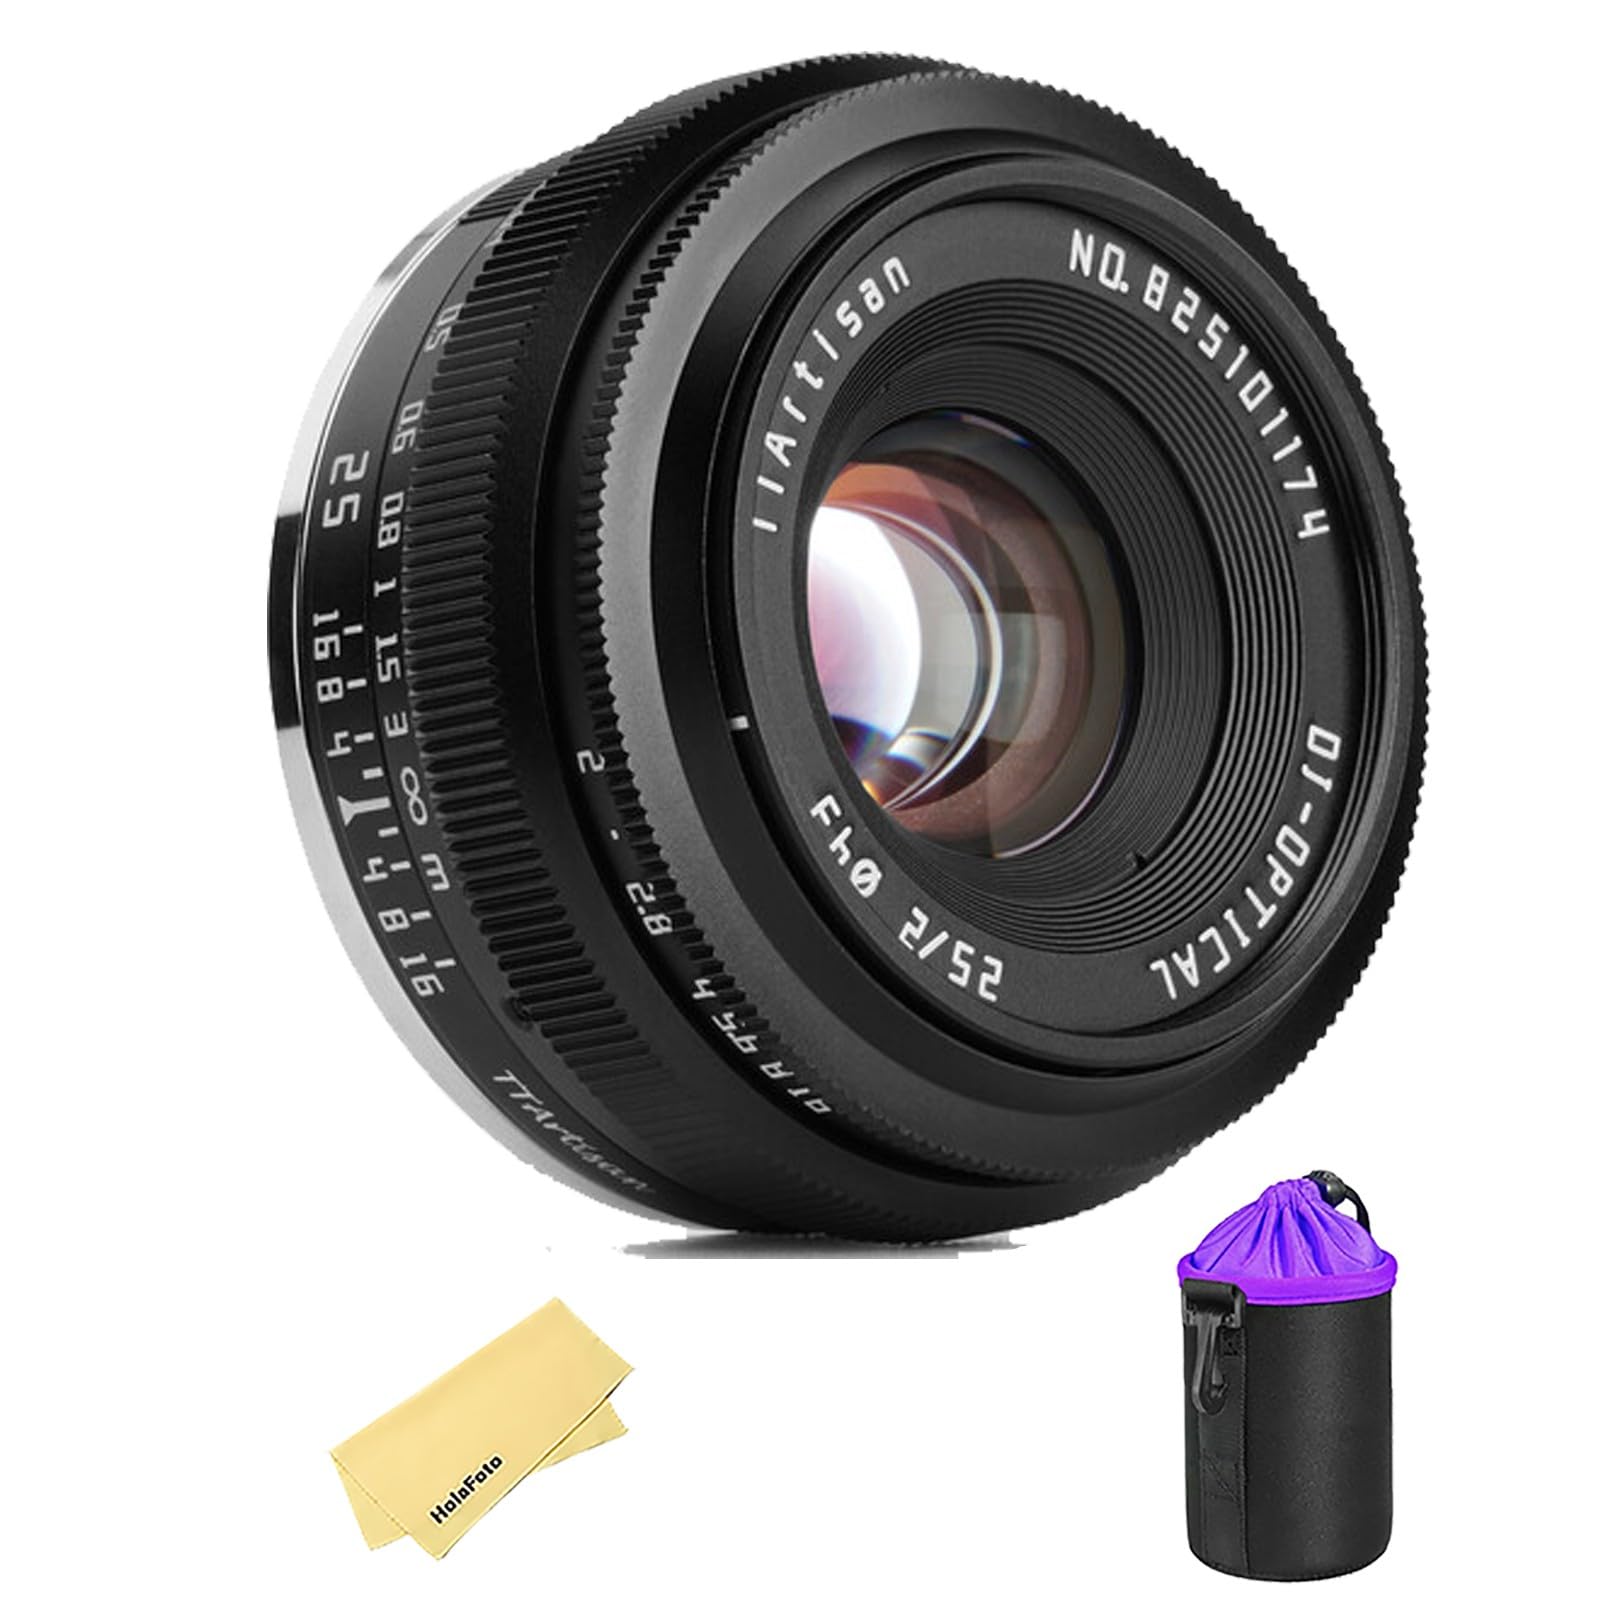 TTArtisan 25mm F2 Wide-Angle APS-C Camera Lens Large Aperture Manual Fixed Camera Lens Compatible with Fuji X-Mount Cameras X